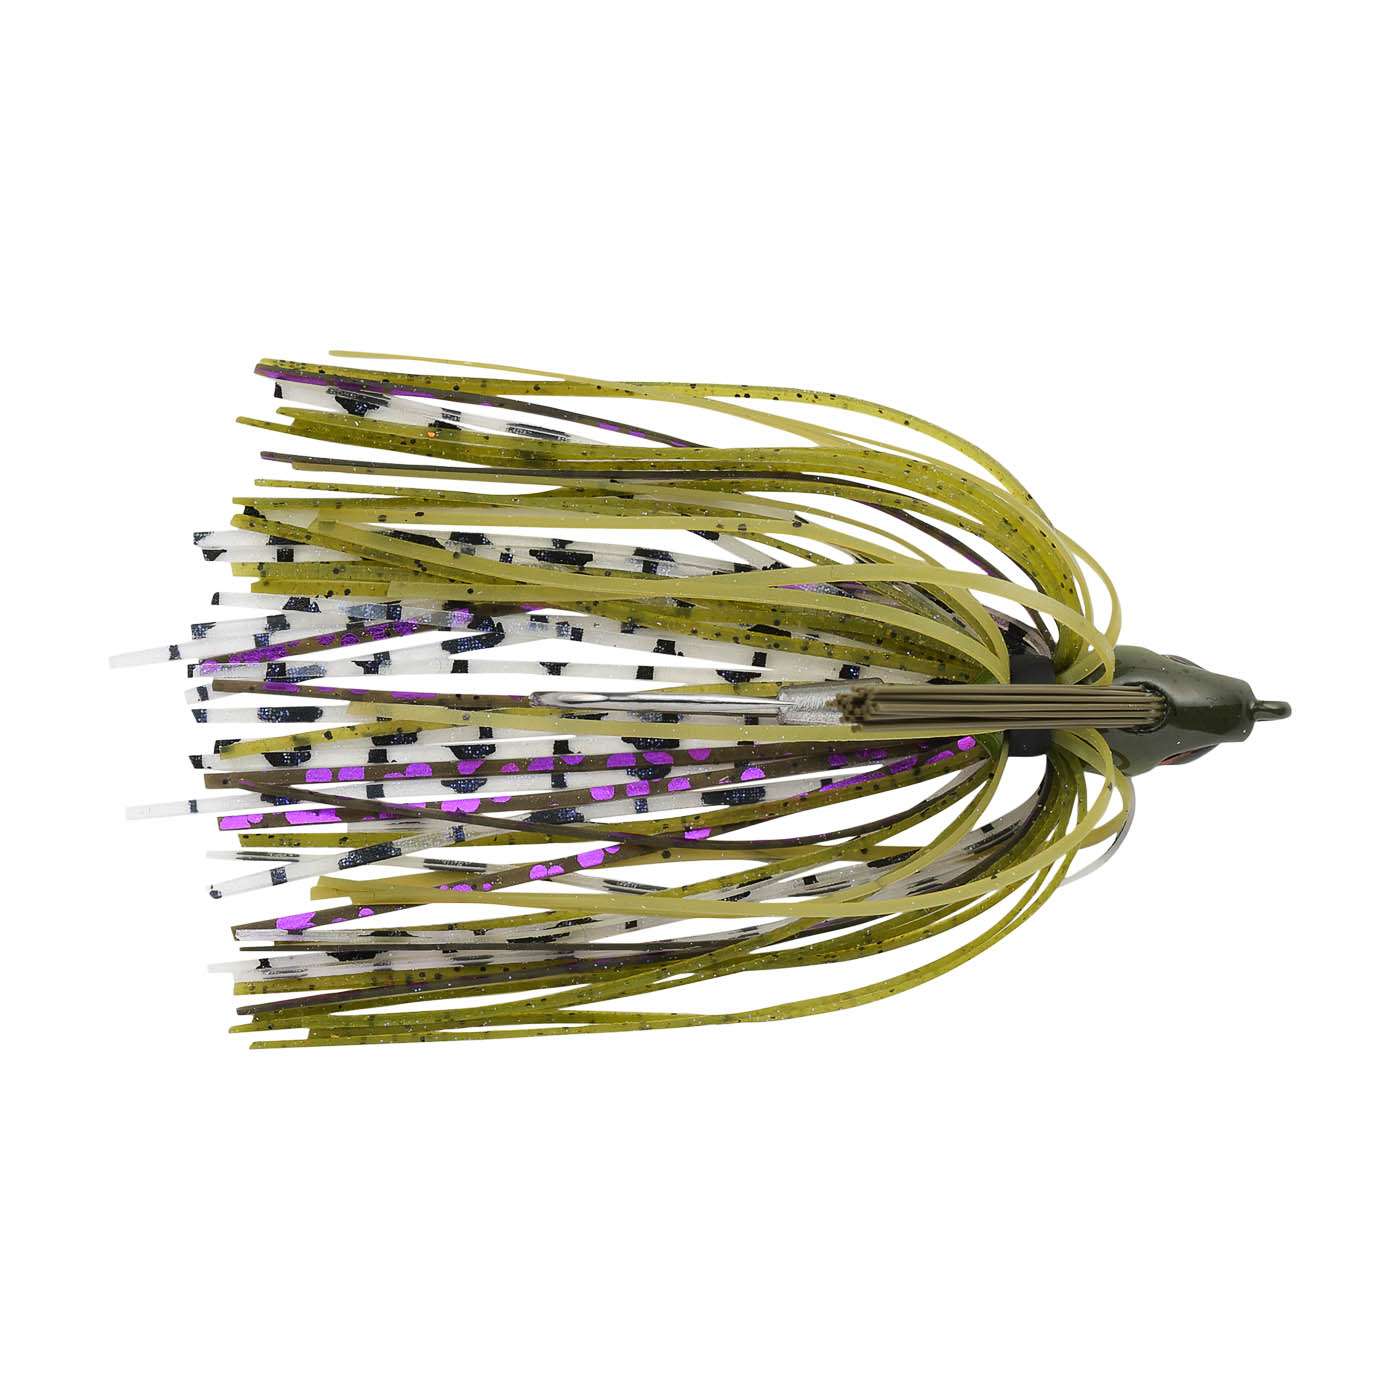 Explore the new PowerBait Jigs starting with the Finesse Swim Jig.